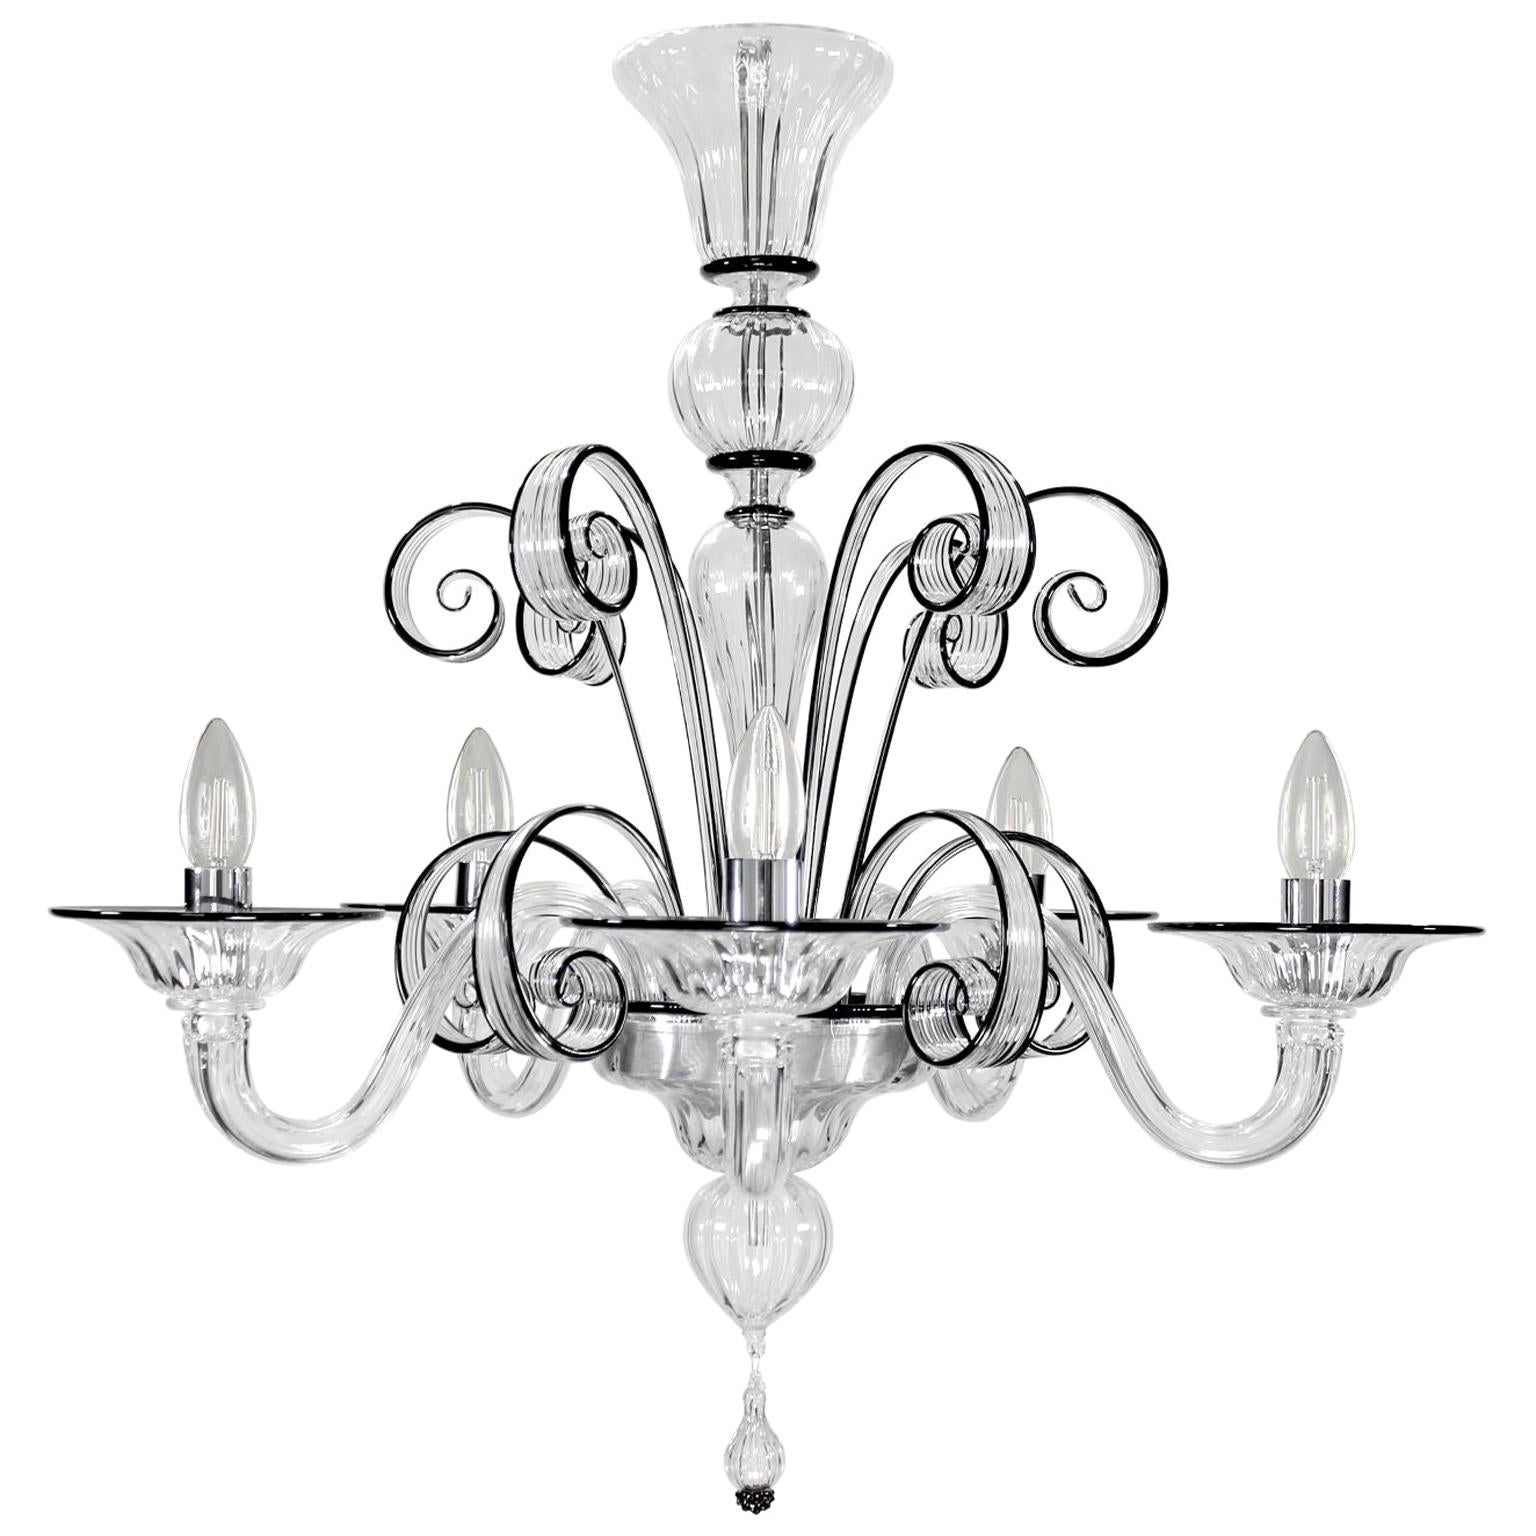 Italian Chandelier 5 Arms Clear Murano Glass Black Details by Multiforme For Sale